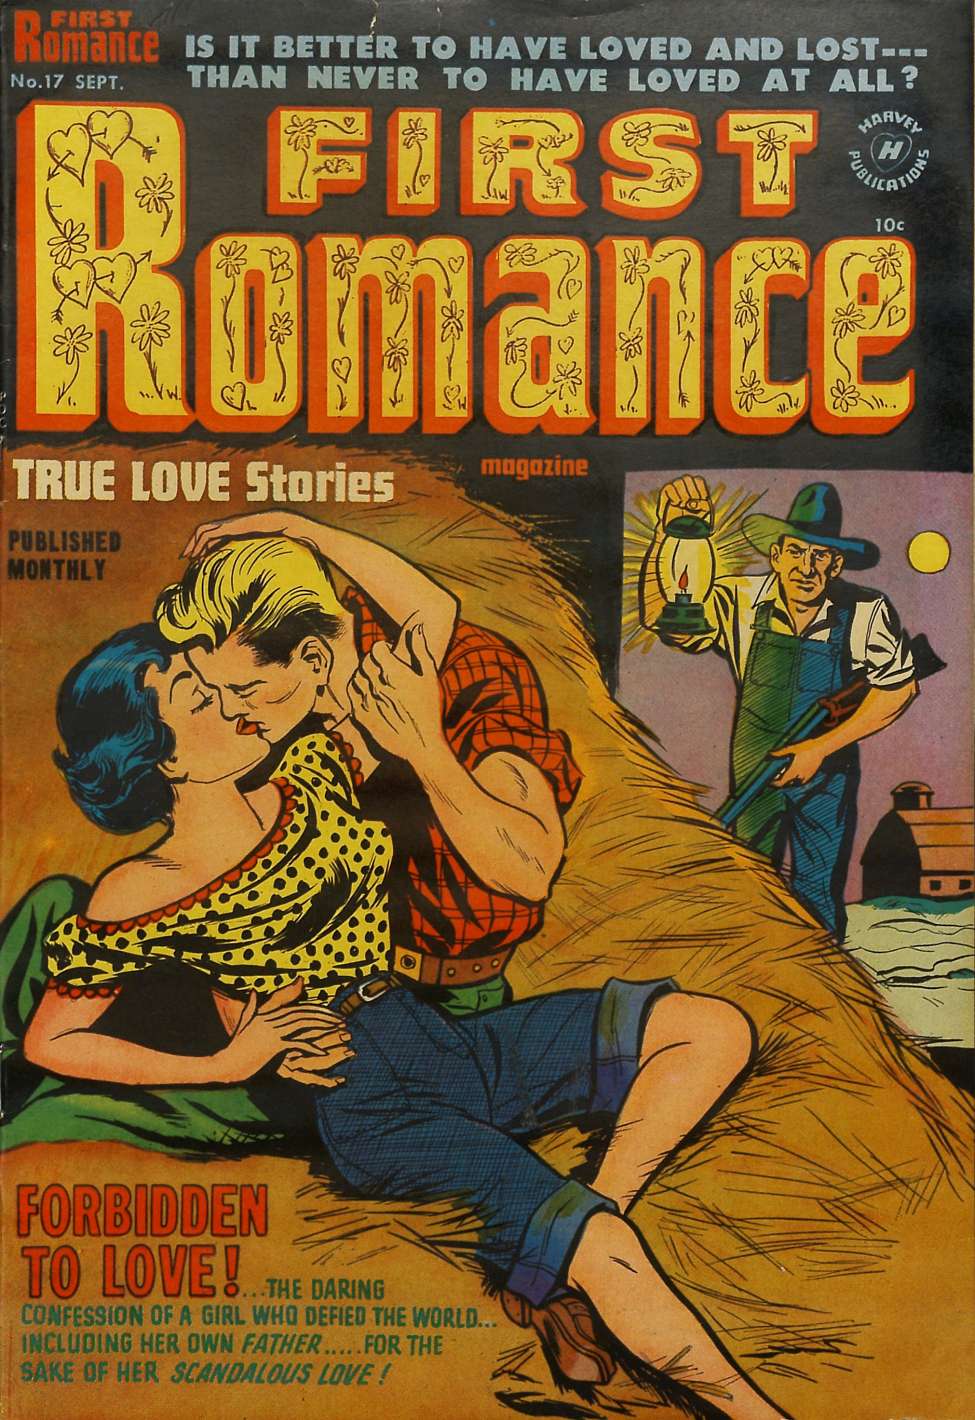 Comic Book Cover For First Romance Magazine 17 - Version 1